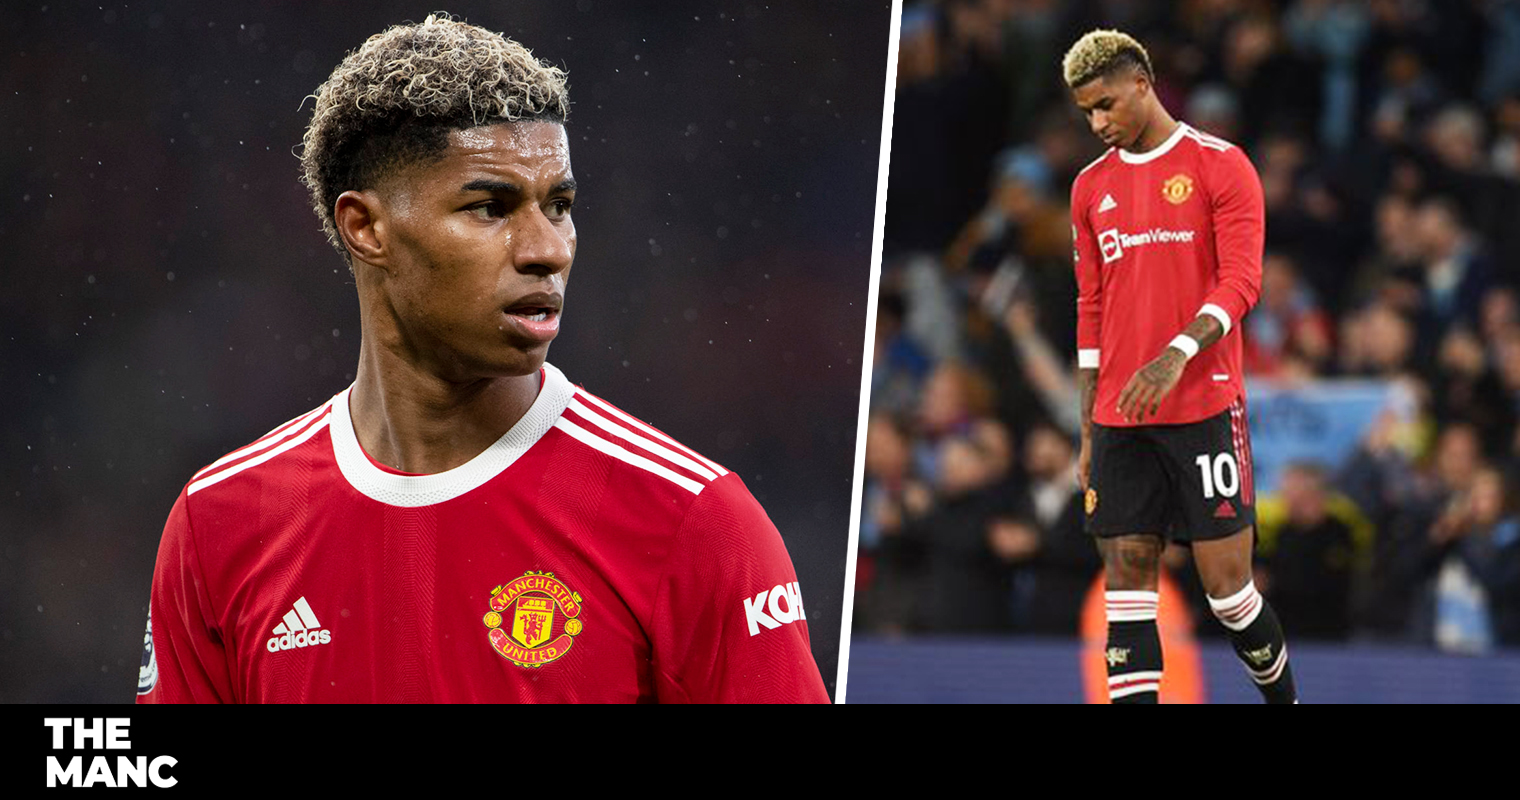 Marcus Rashford speaks out in response to viral 'abuse' video after match